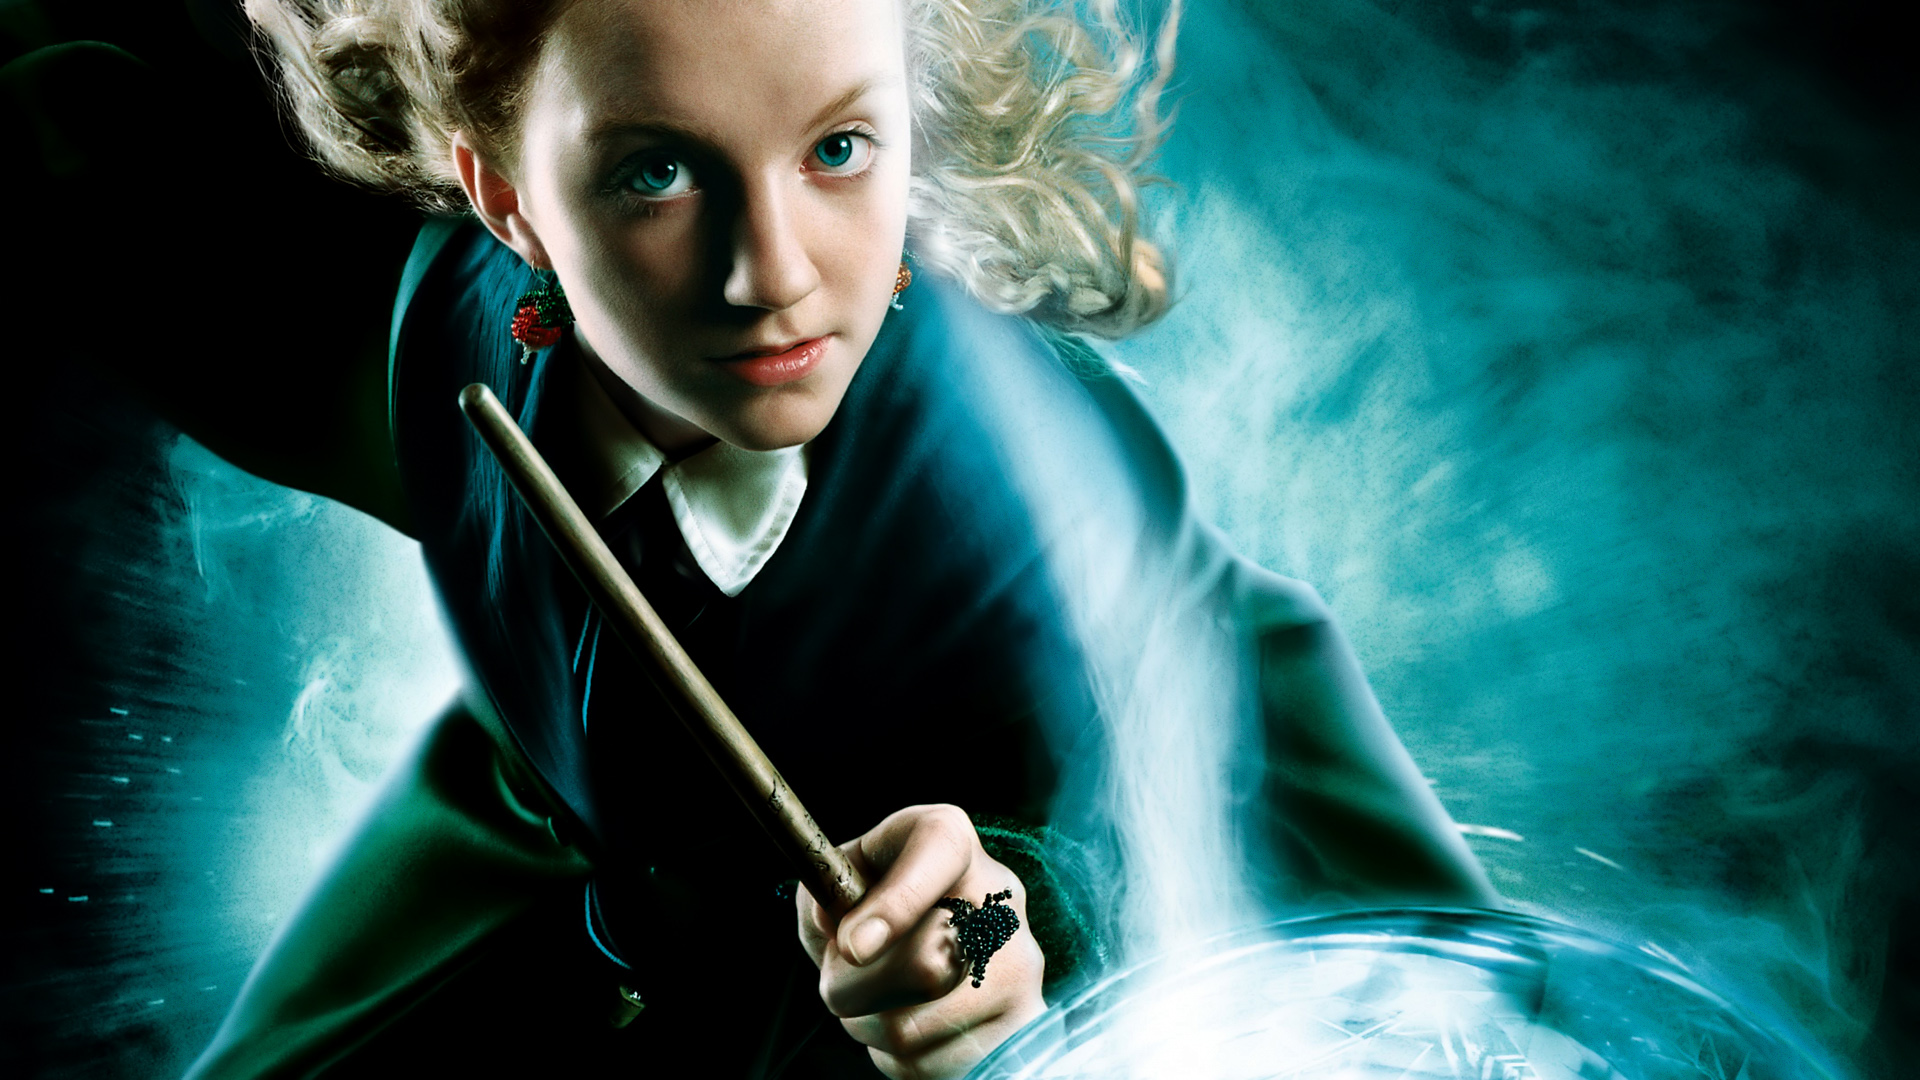 New Lock Screen Wallpapers harry potter, movie, harry potter and the order of the phoenix